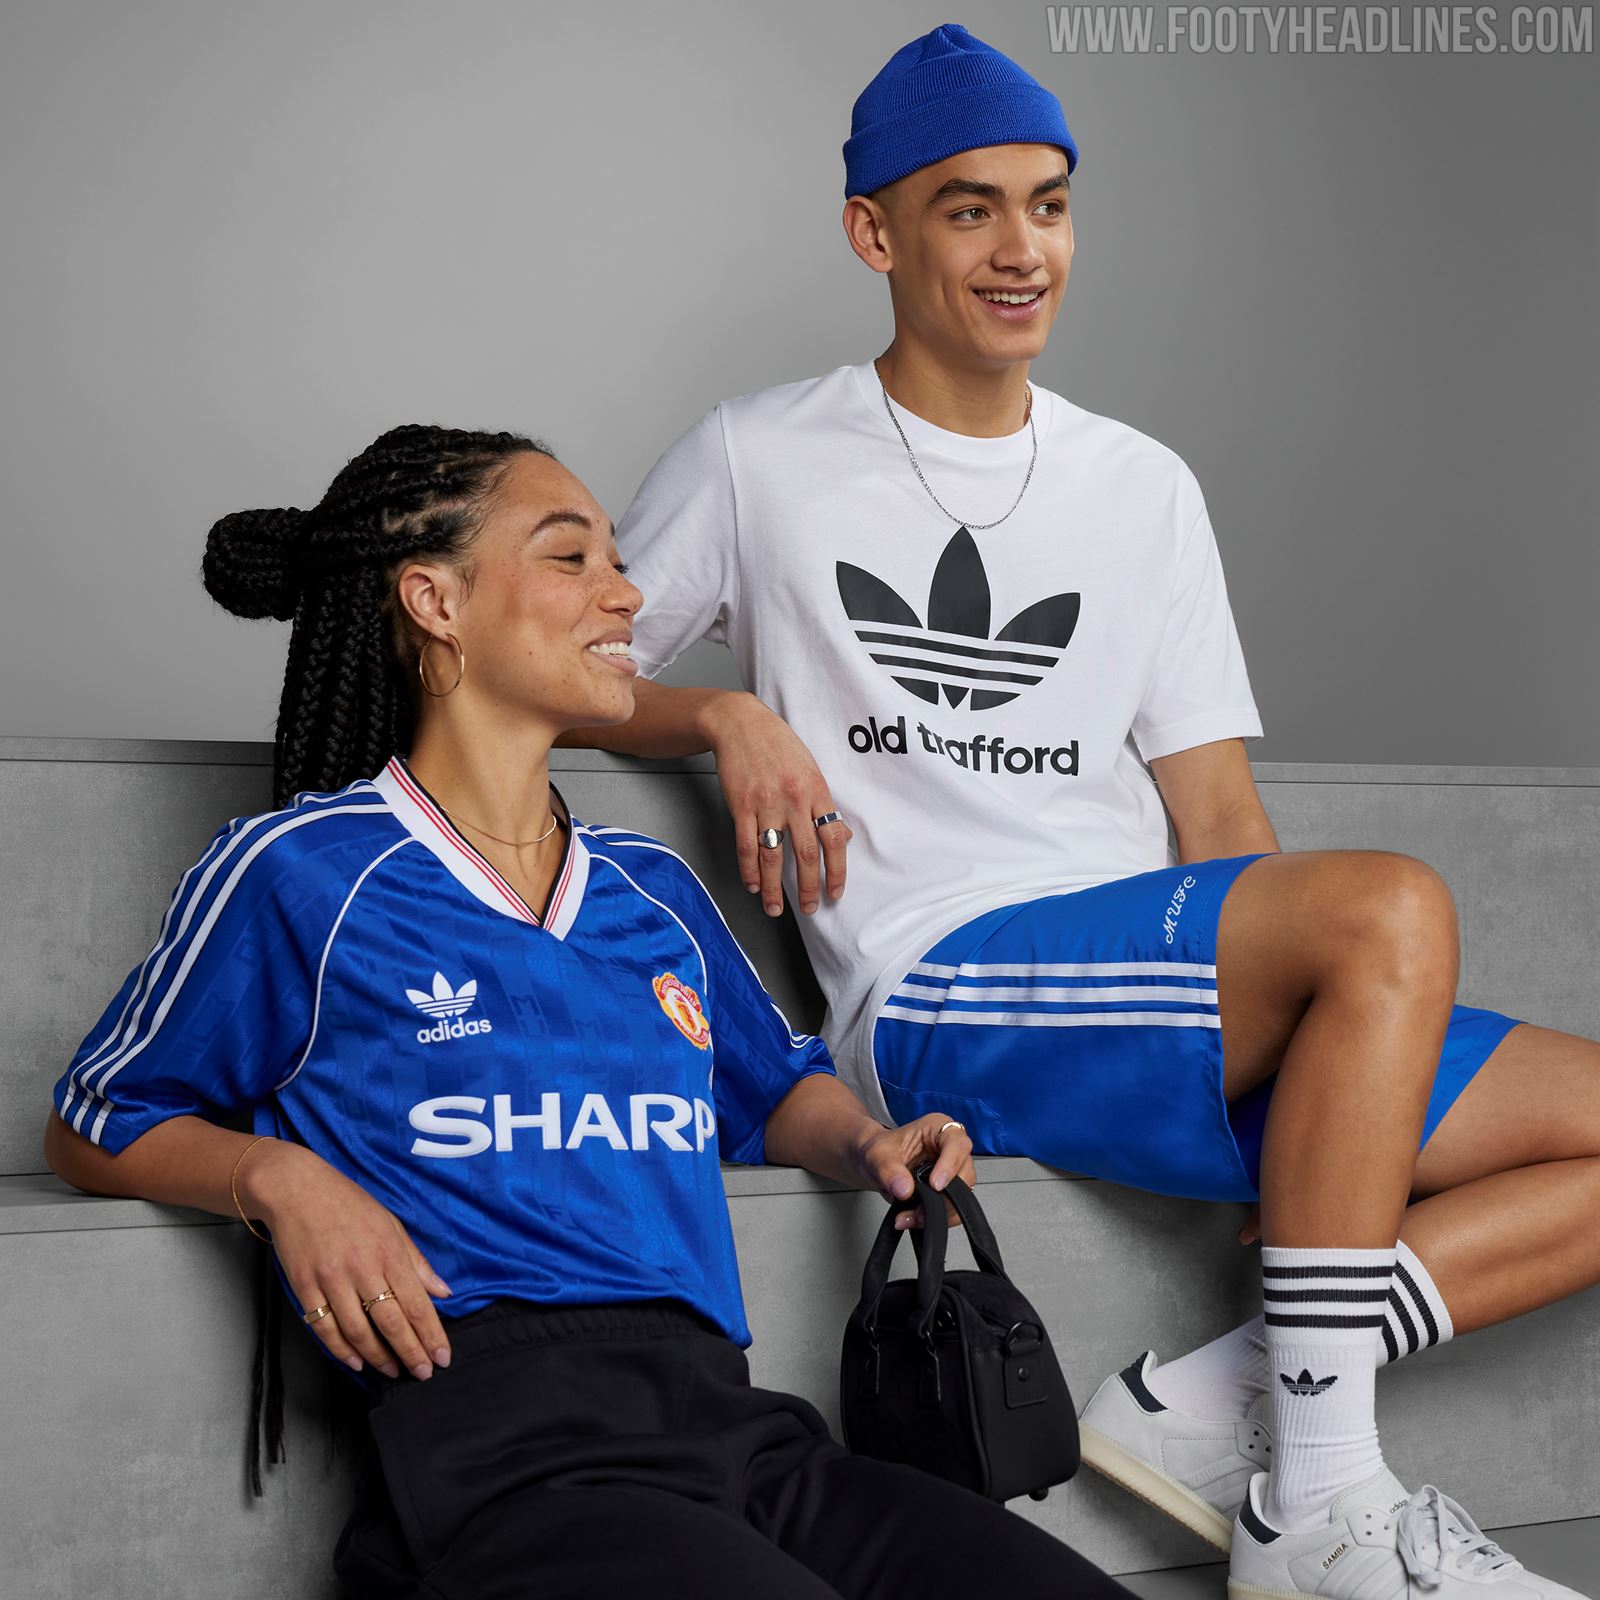 Adidas Manchester United 1988-1990 Third Kit Remake + Full Collection  Released - Footy Headlines